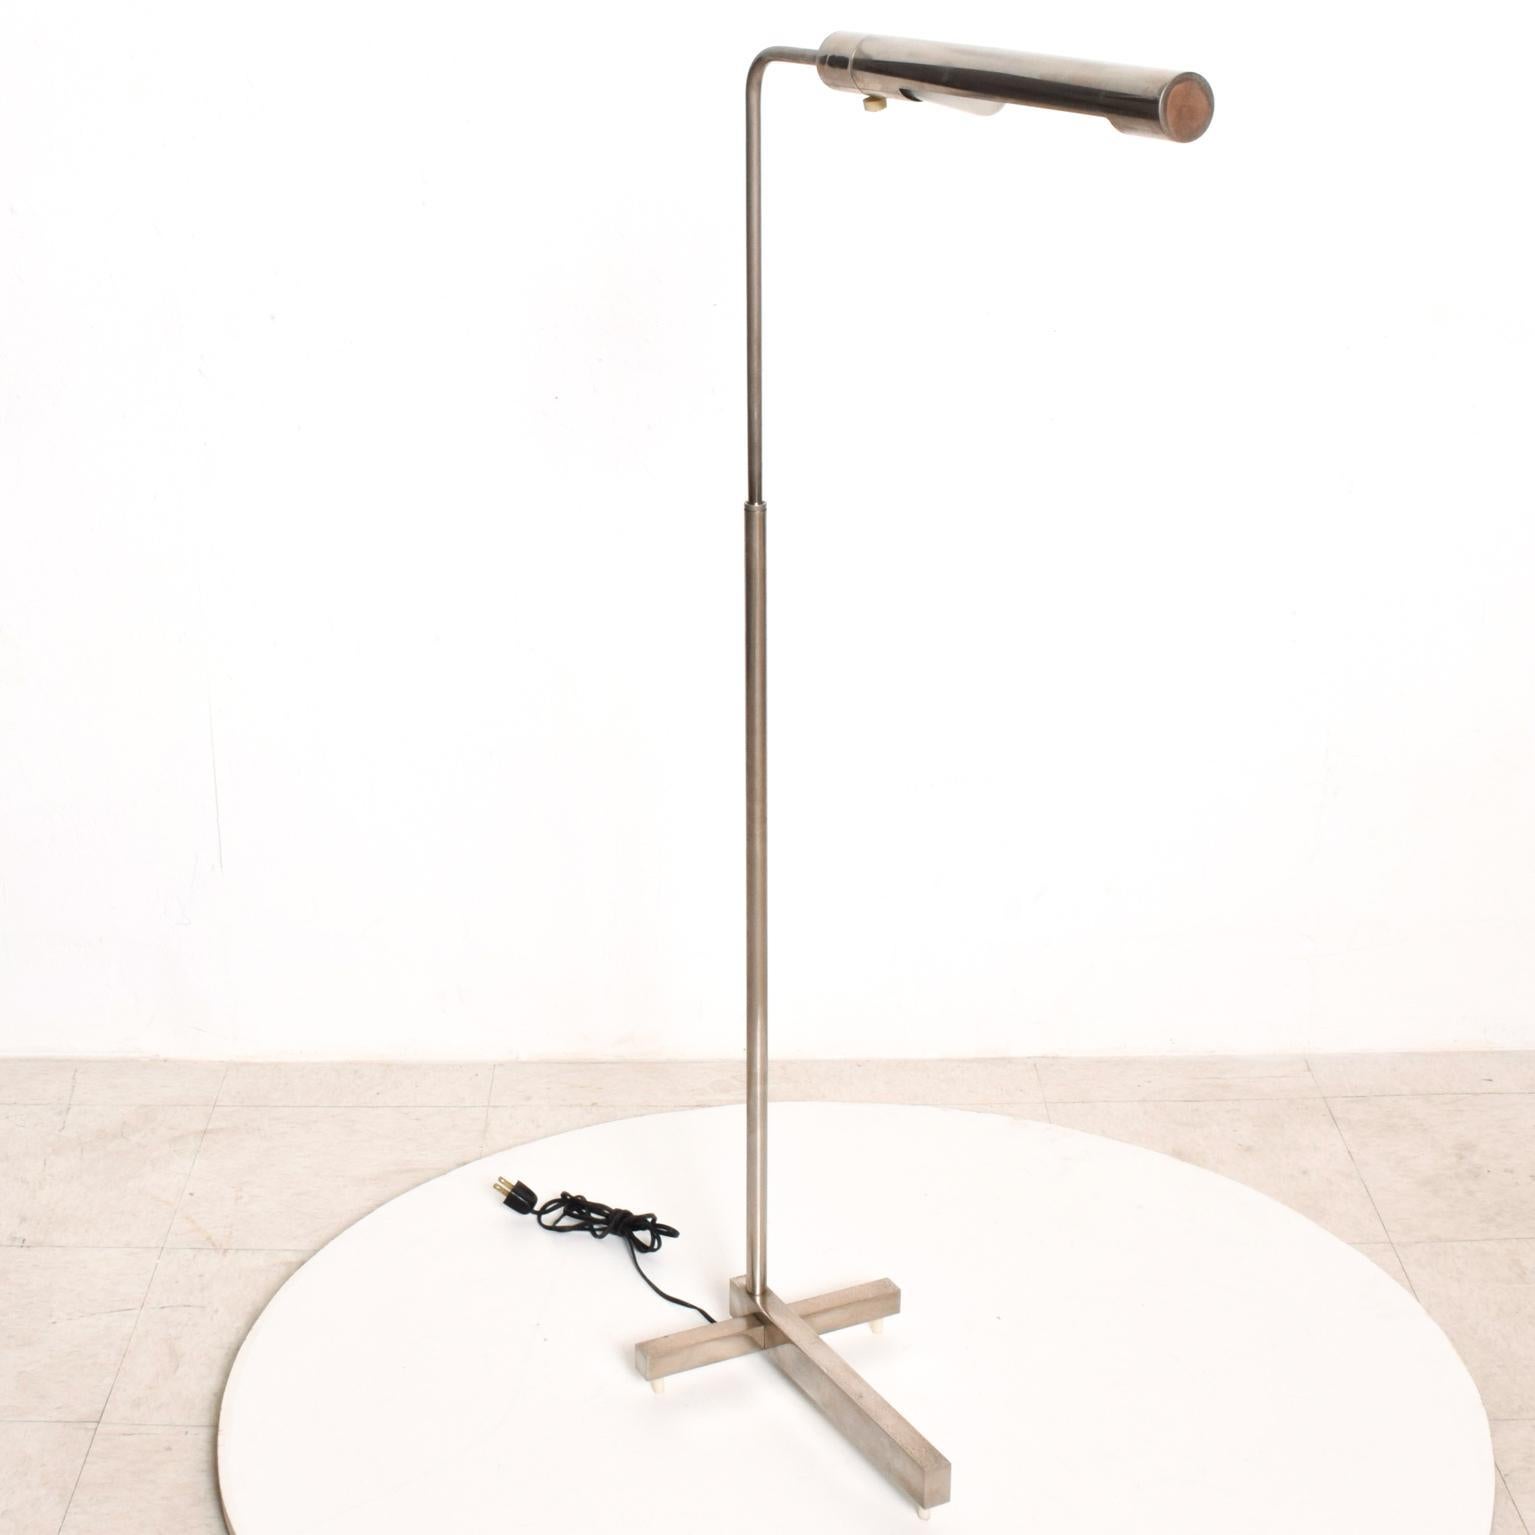 Late 20th Century Mid-Century Modern Task Reading Pharmacy Lamp by Casella Nickel-Plated